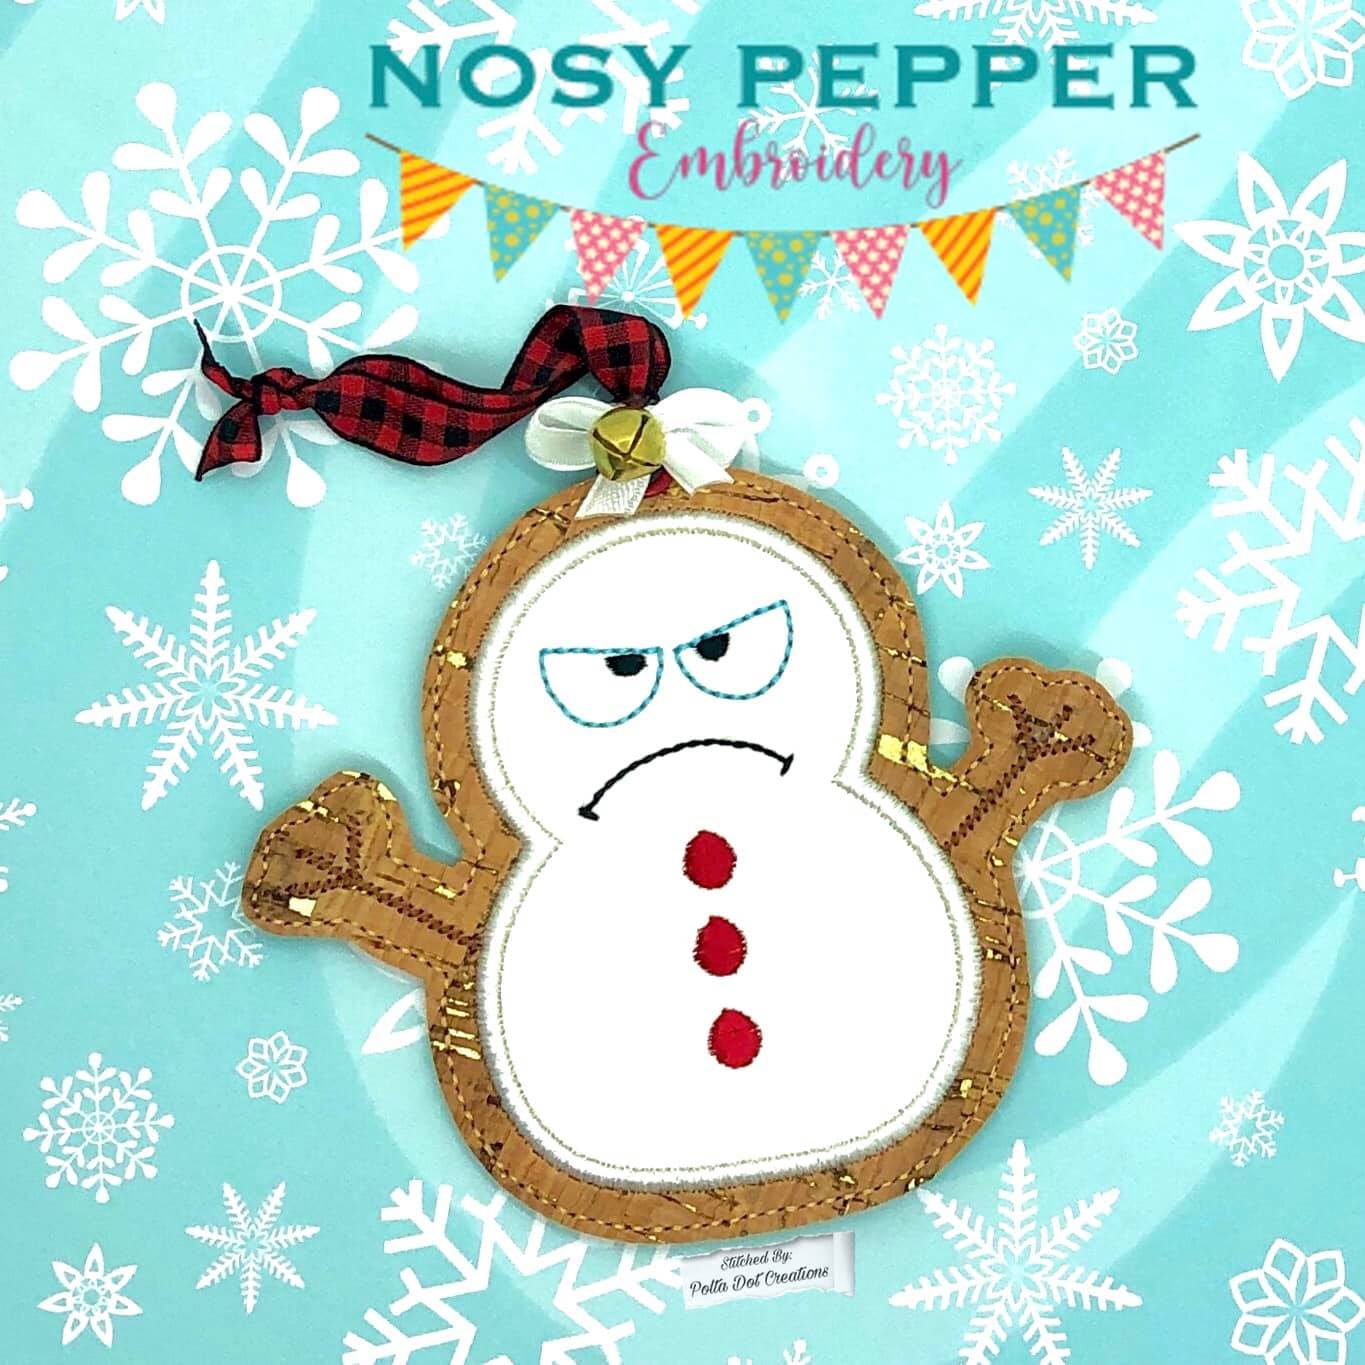 Snowman with Lights - Embroidery Designs & Patterns